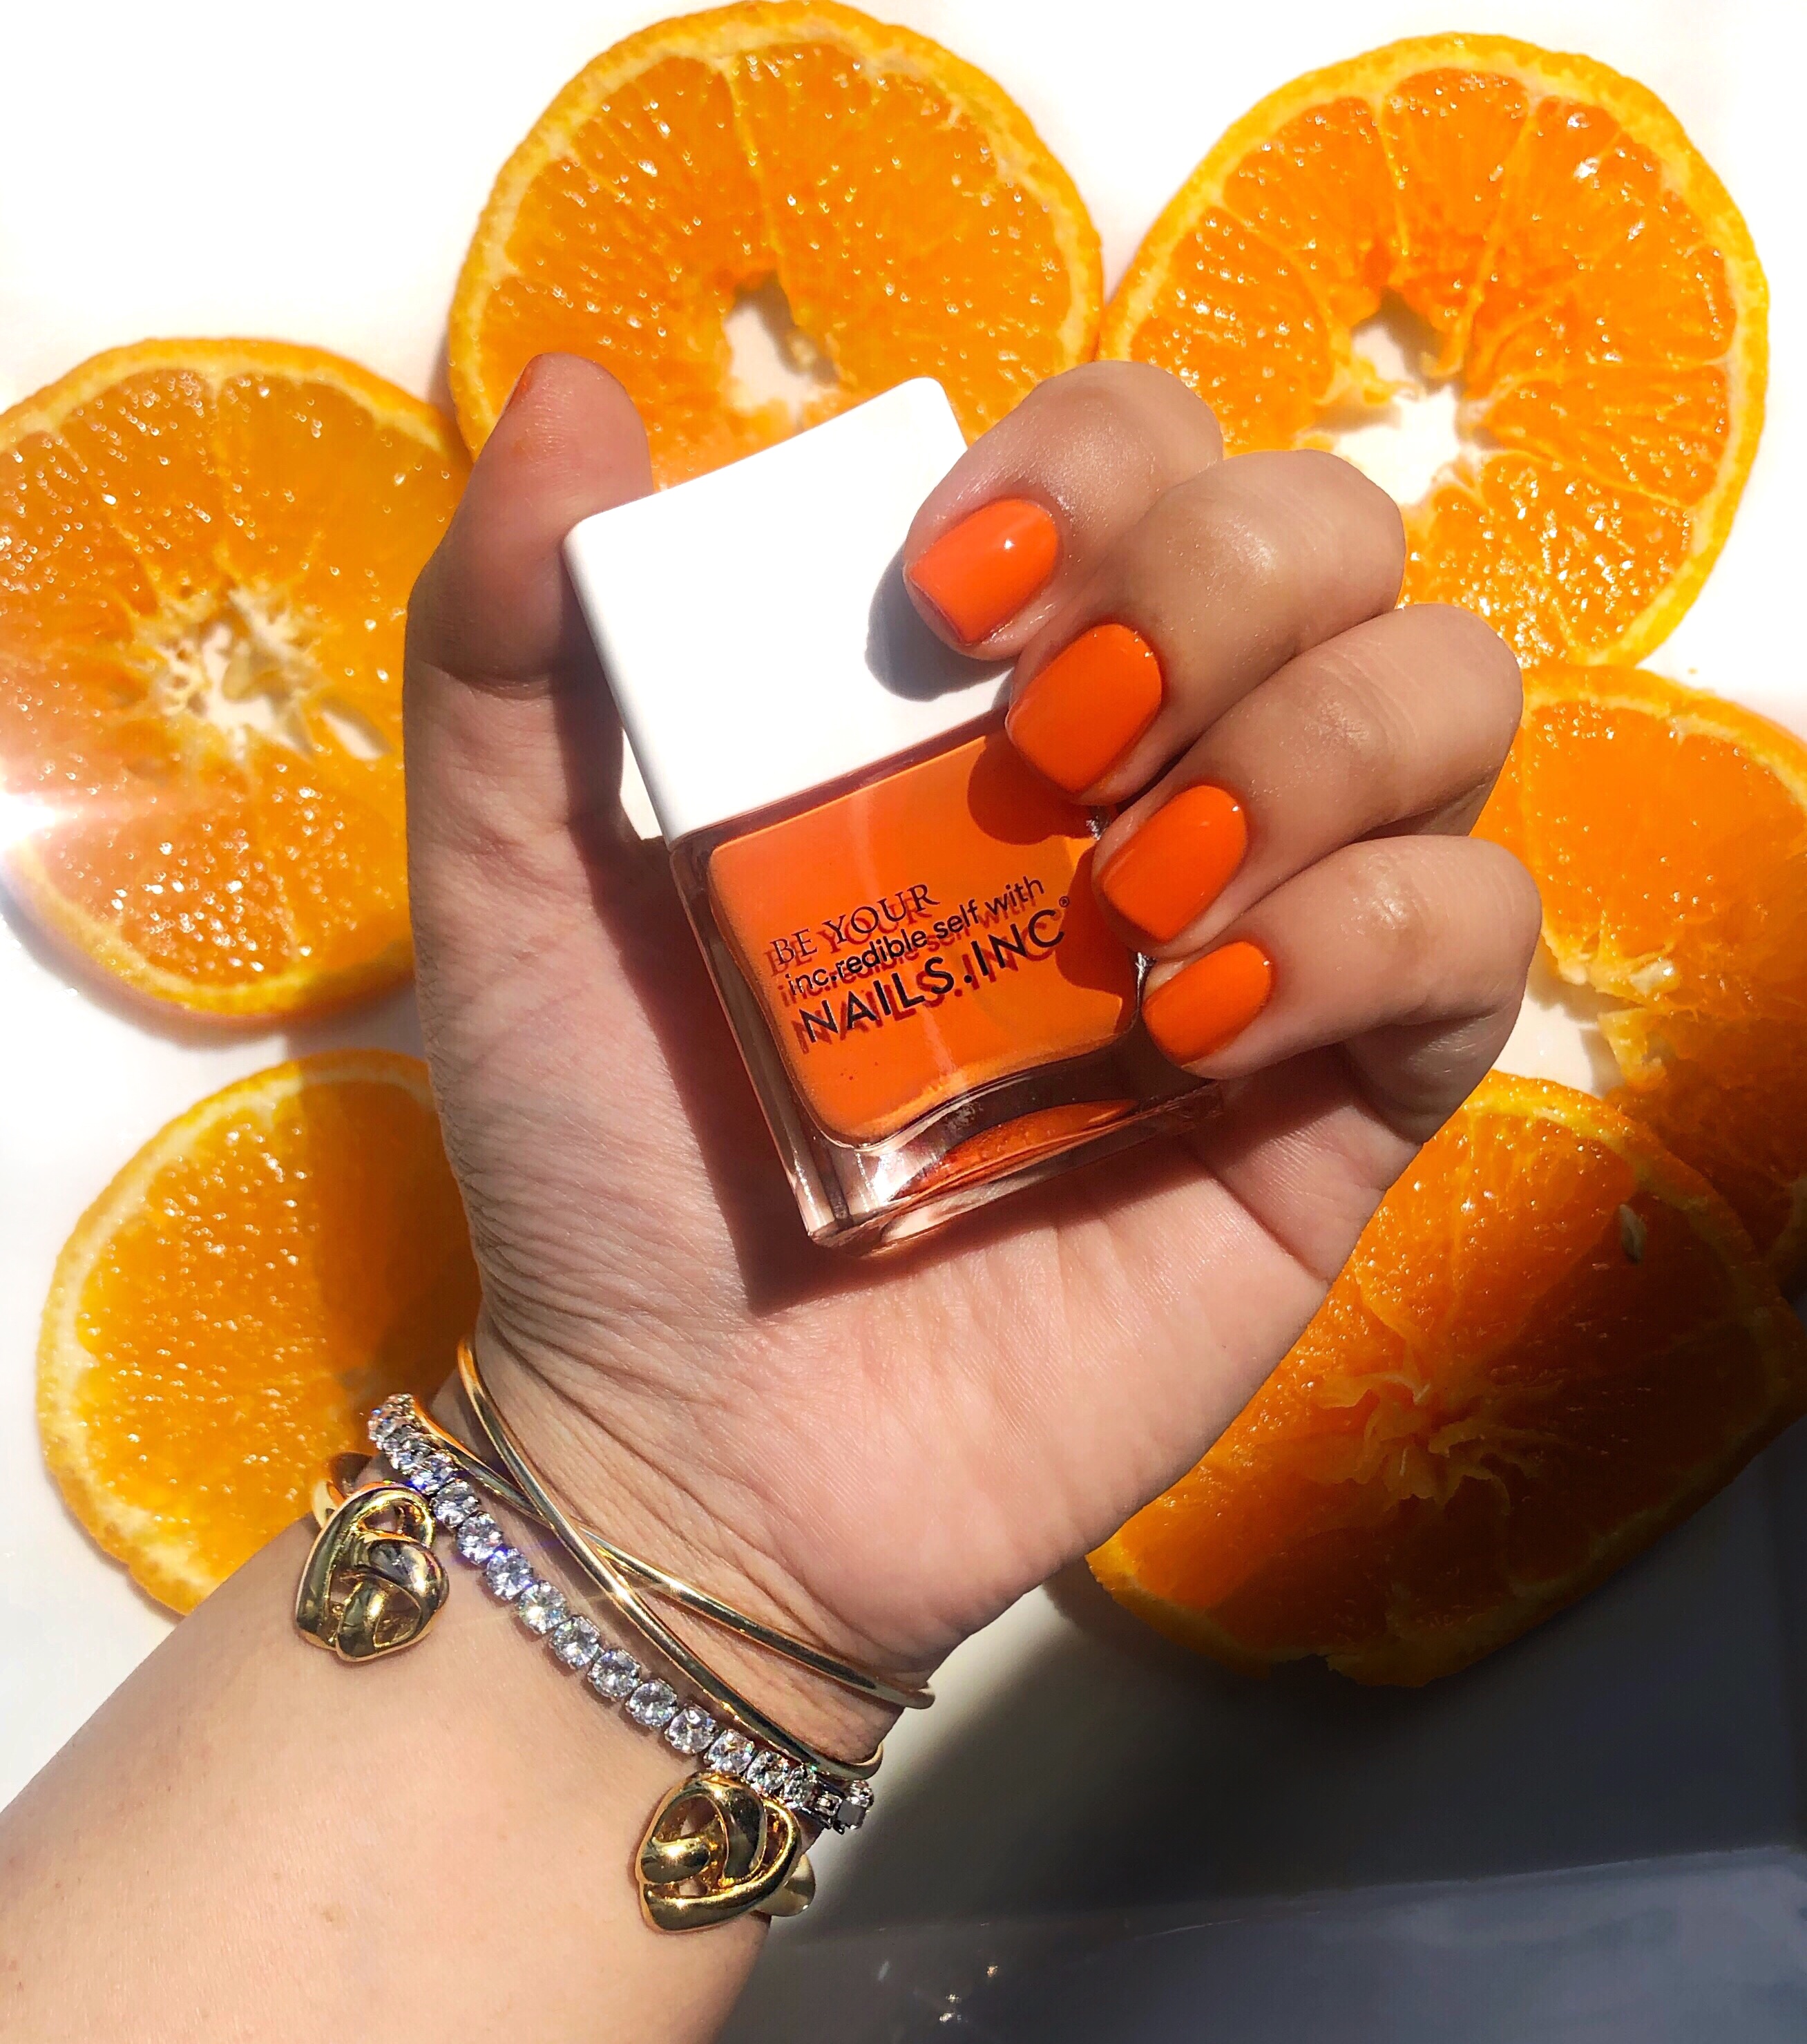 Nails Inc. Freshly Juiced Duo Review | Ask and Tell Beauty